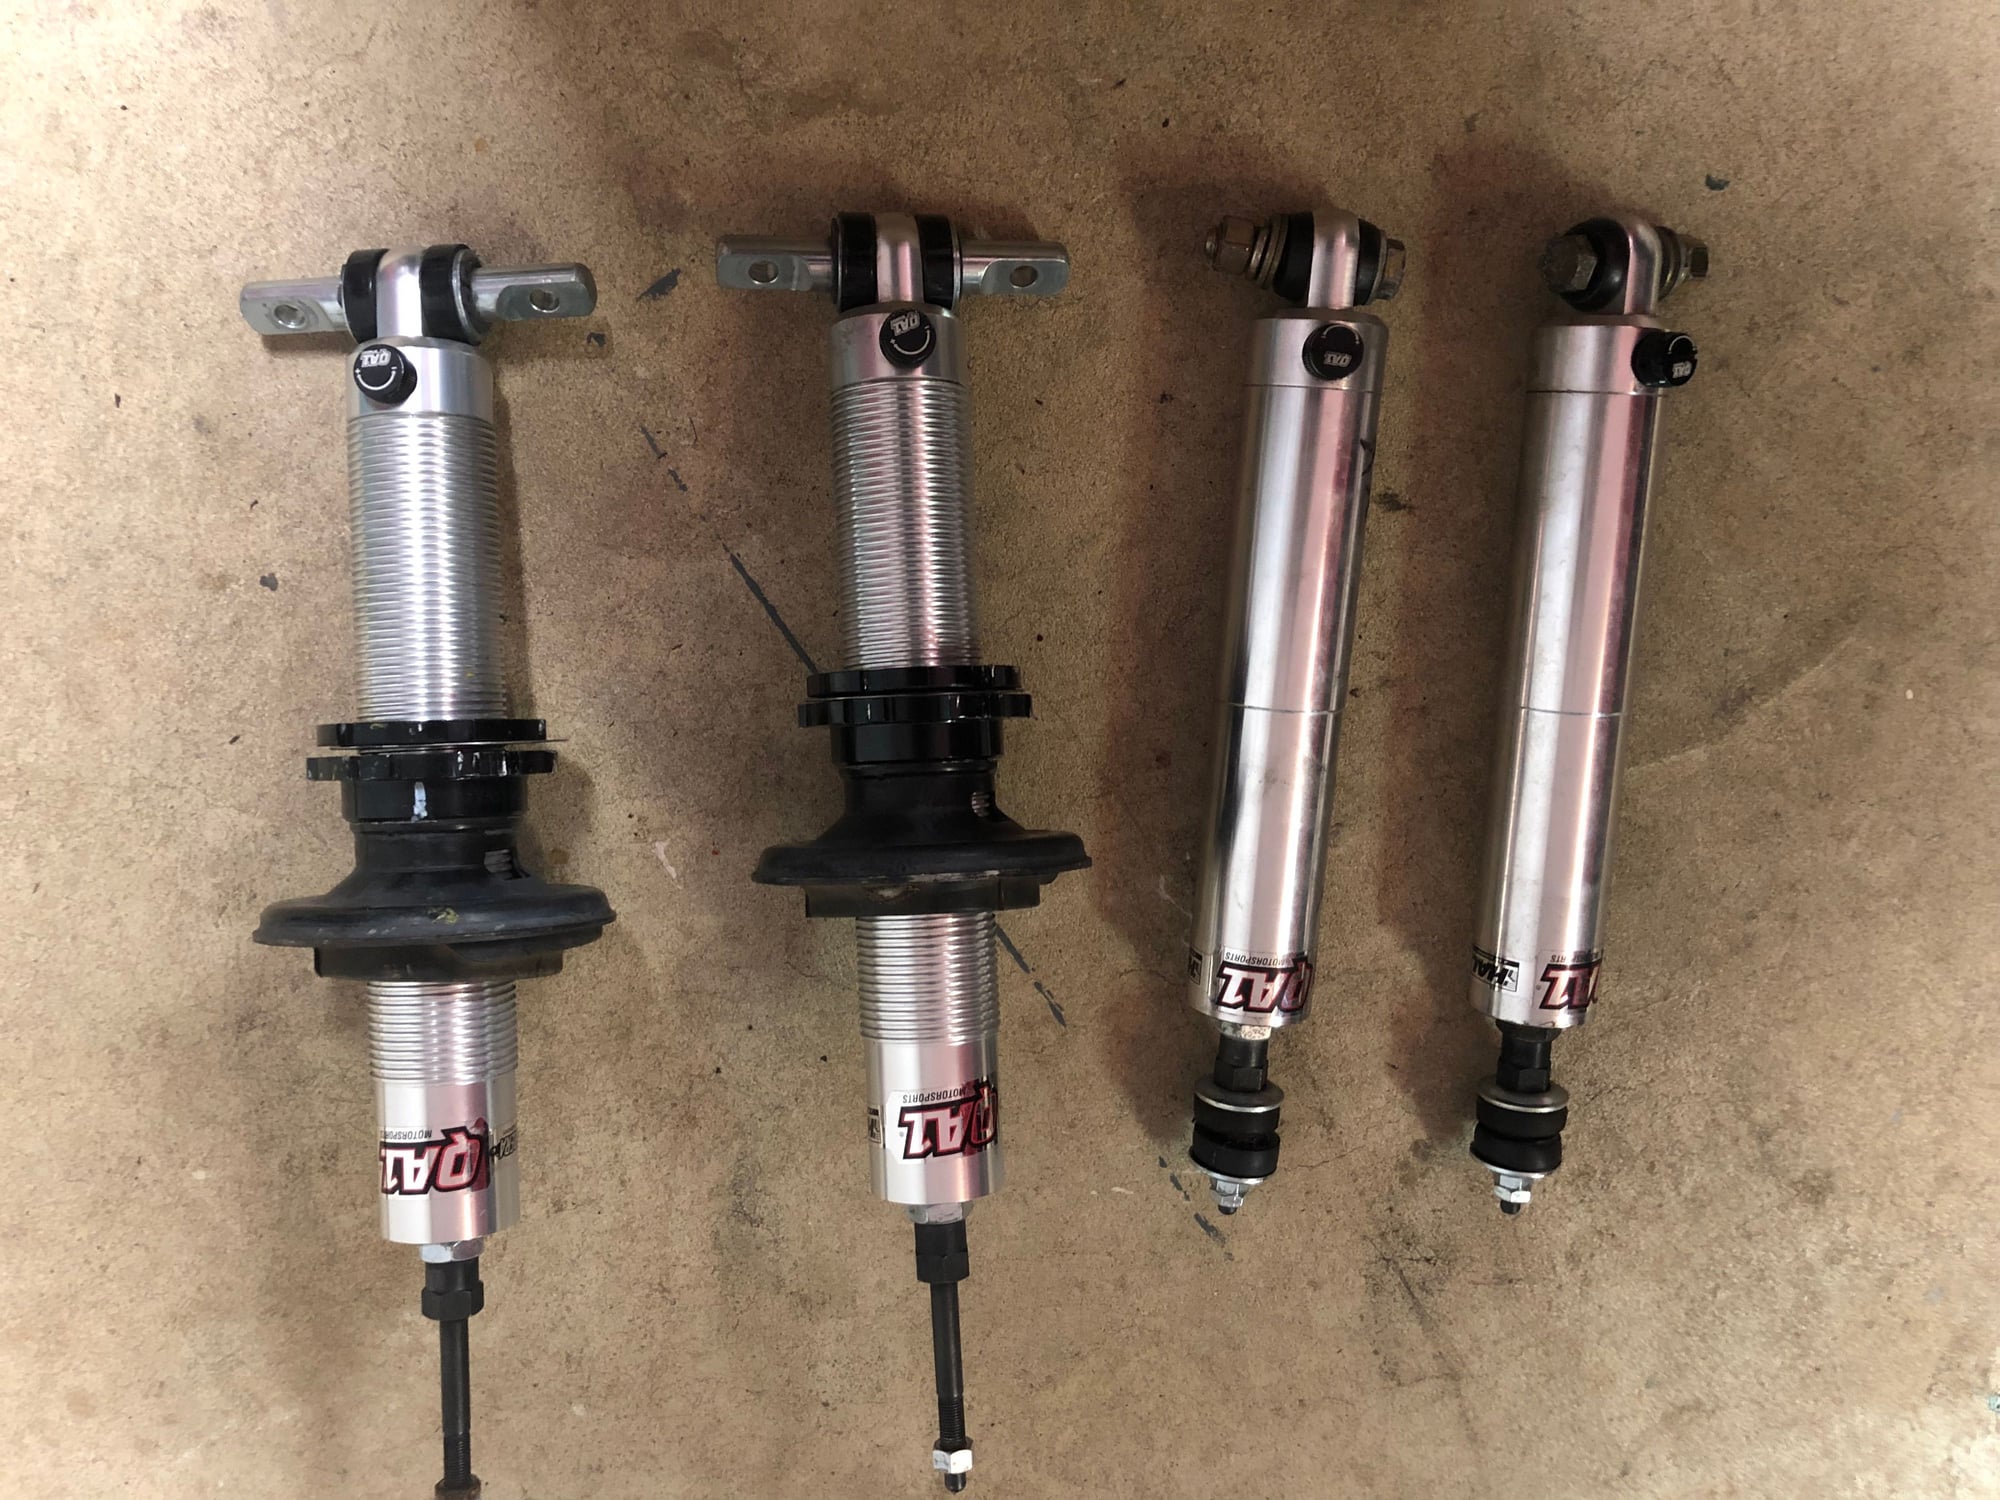  - 1993-2002 QA1 Single Adj Shocks Front and Rear with eibach springs - Long Hill, NJ 07946, United States